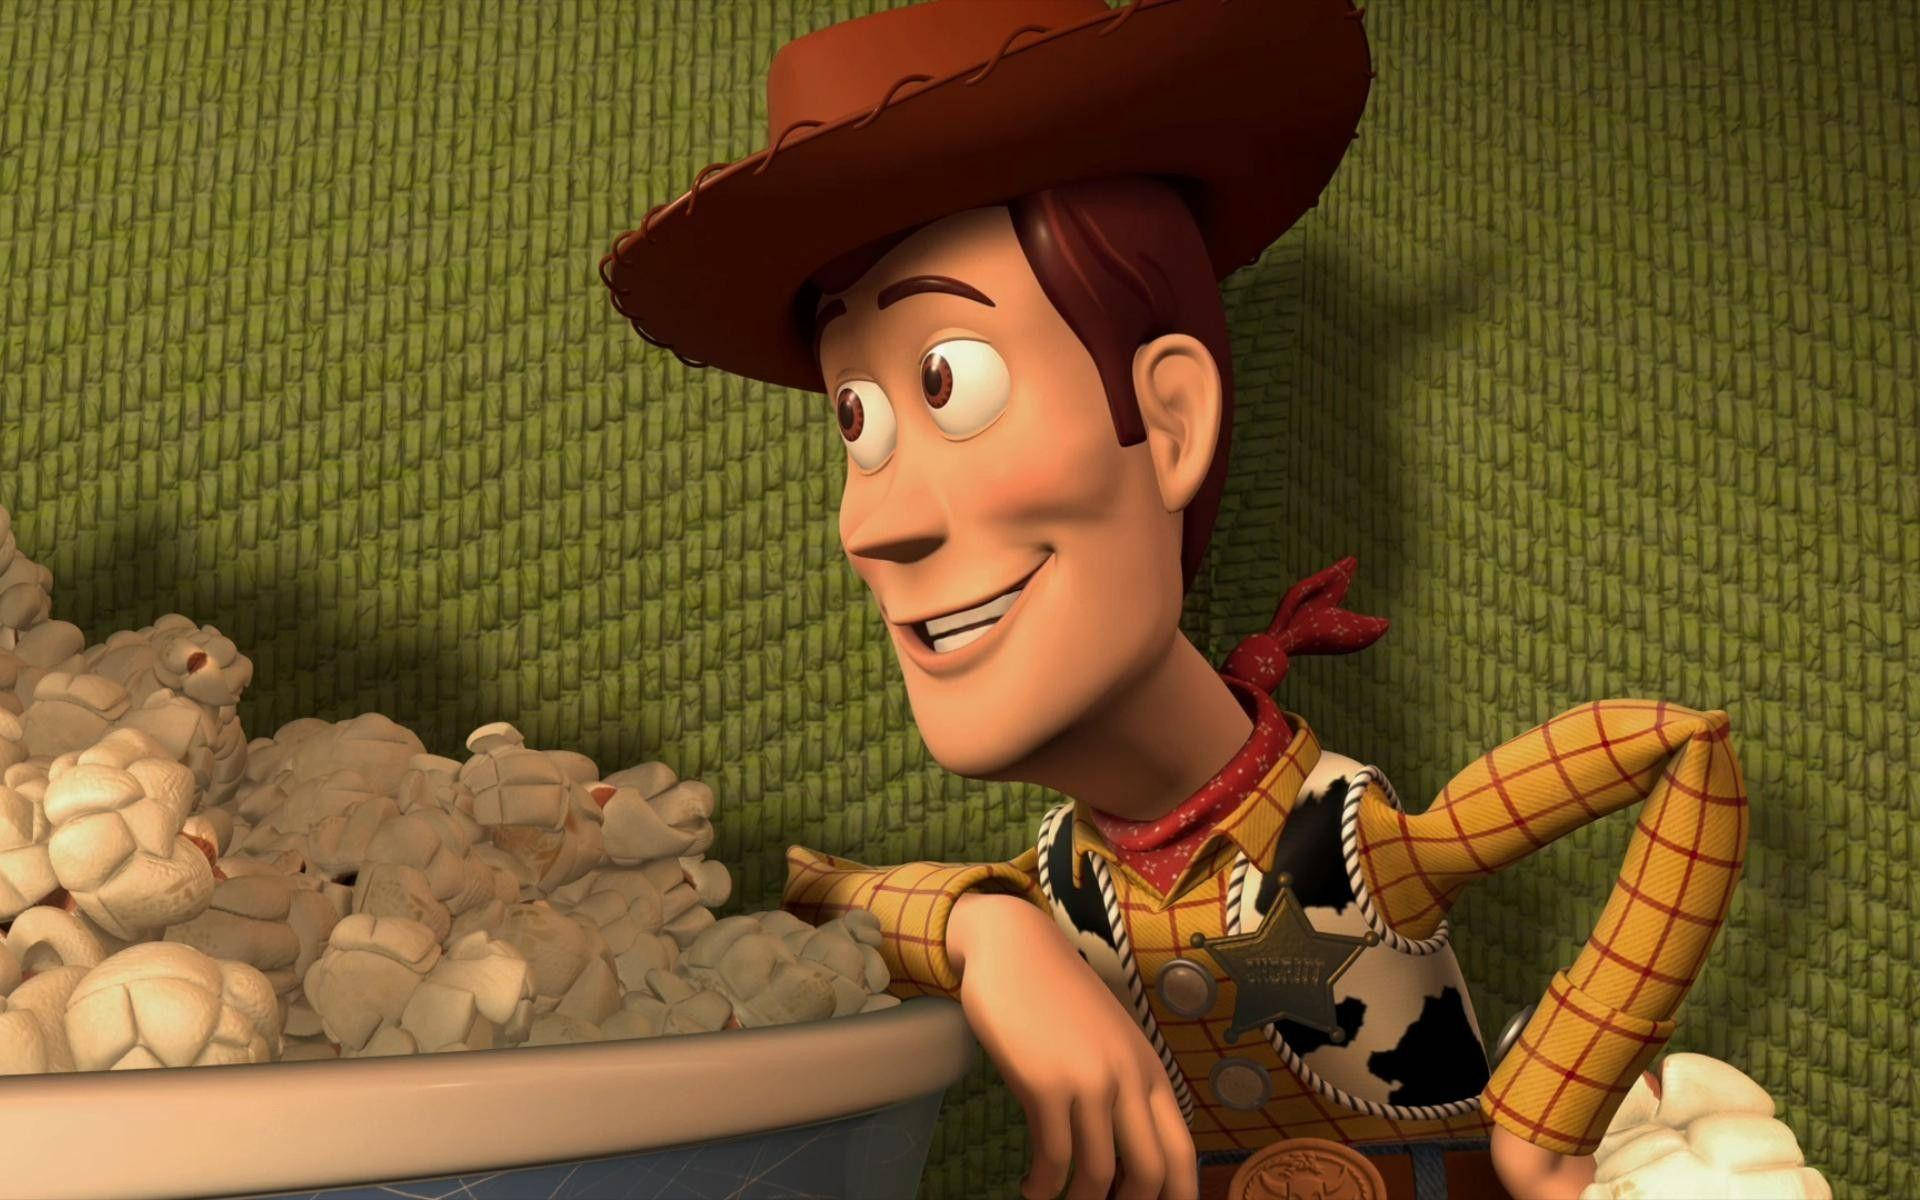 Woody With Popcorn Background